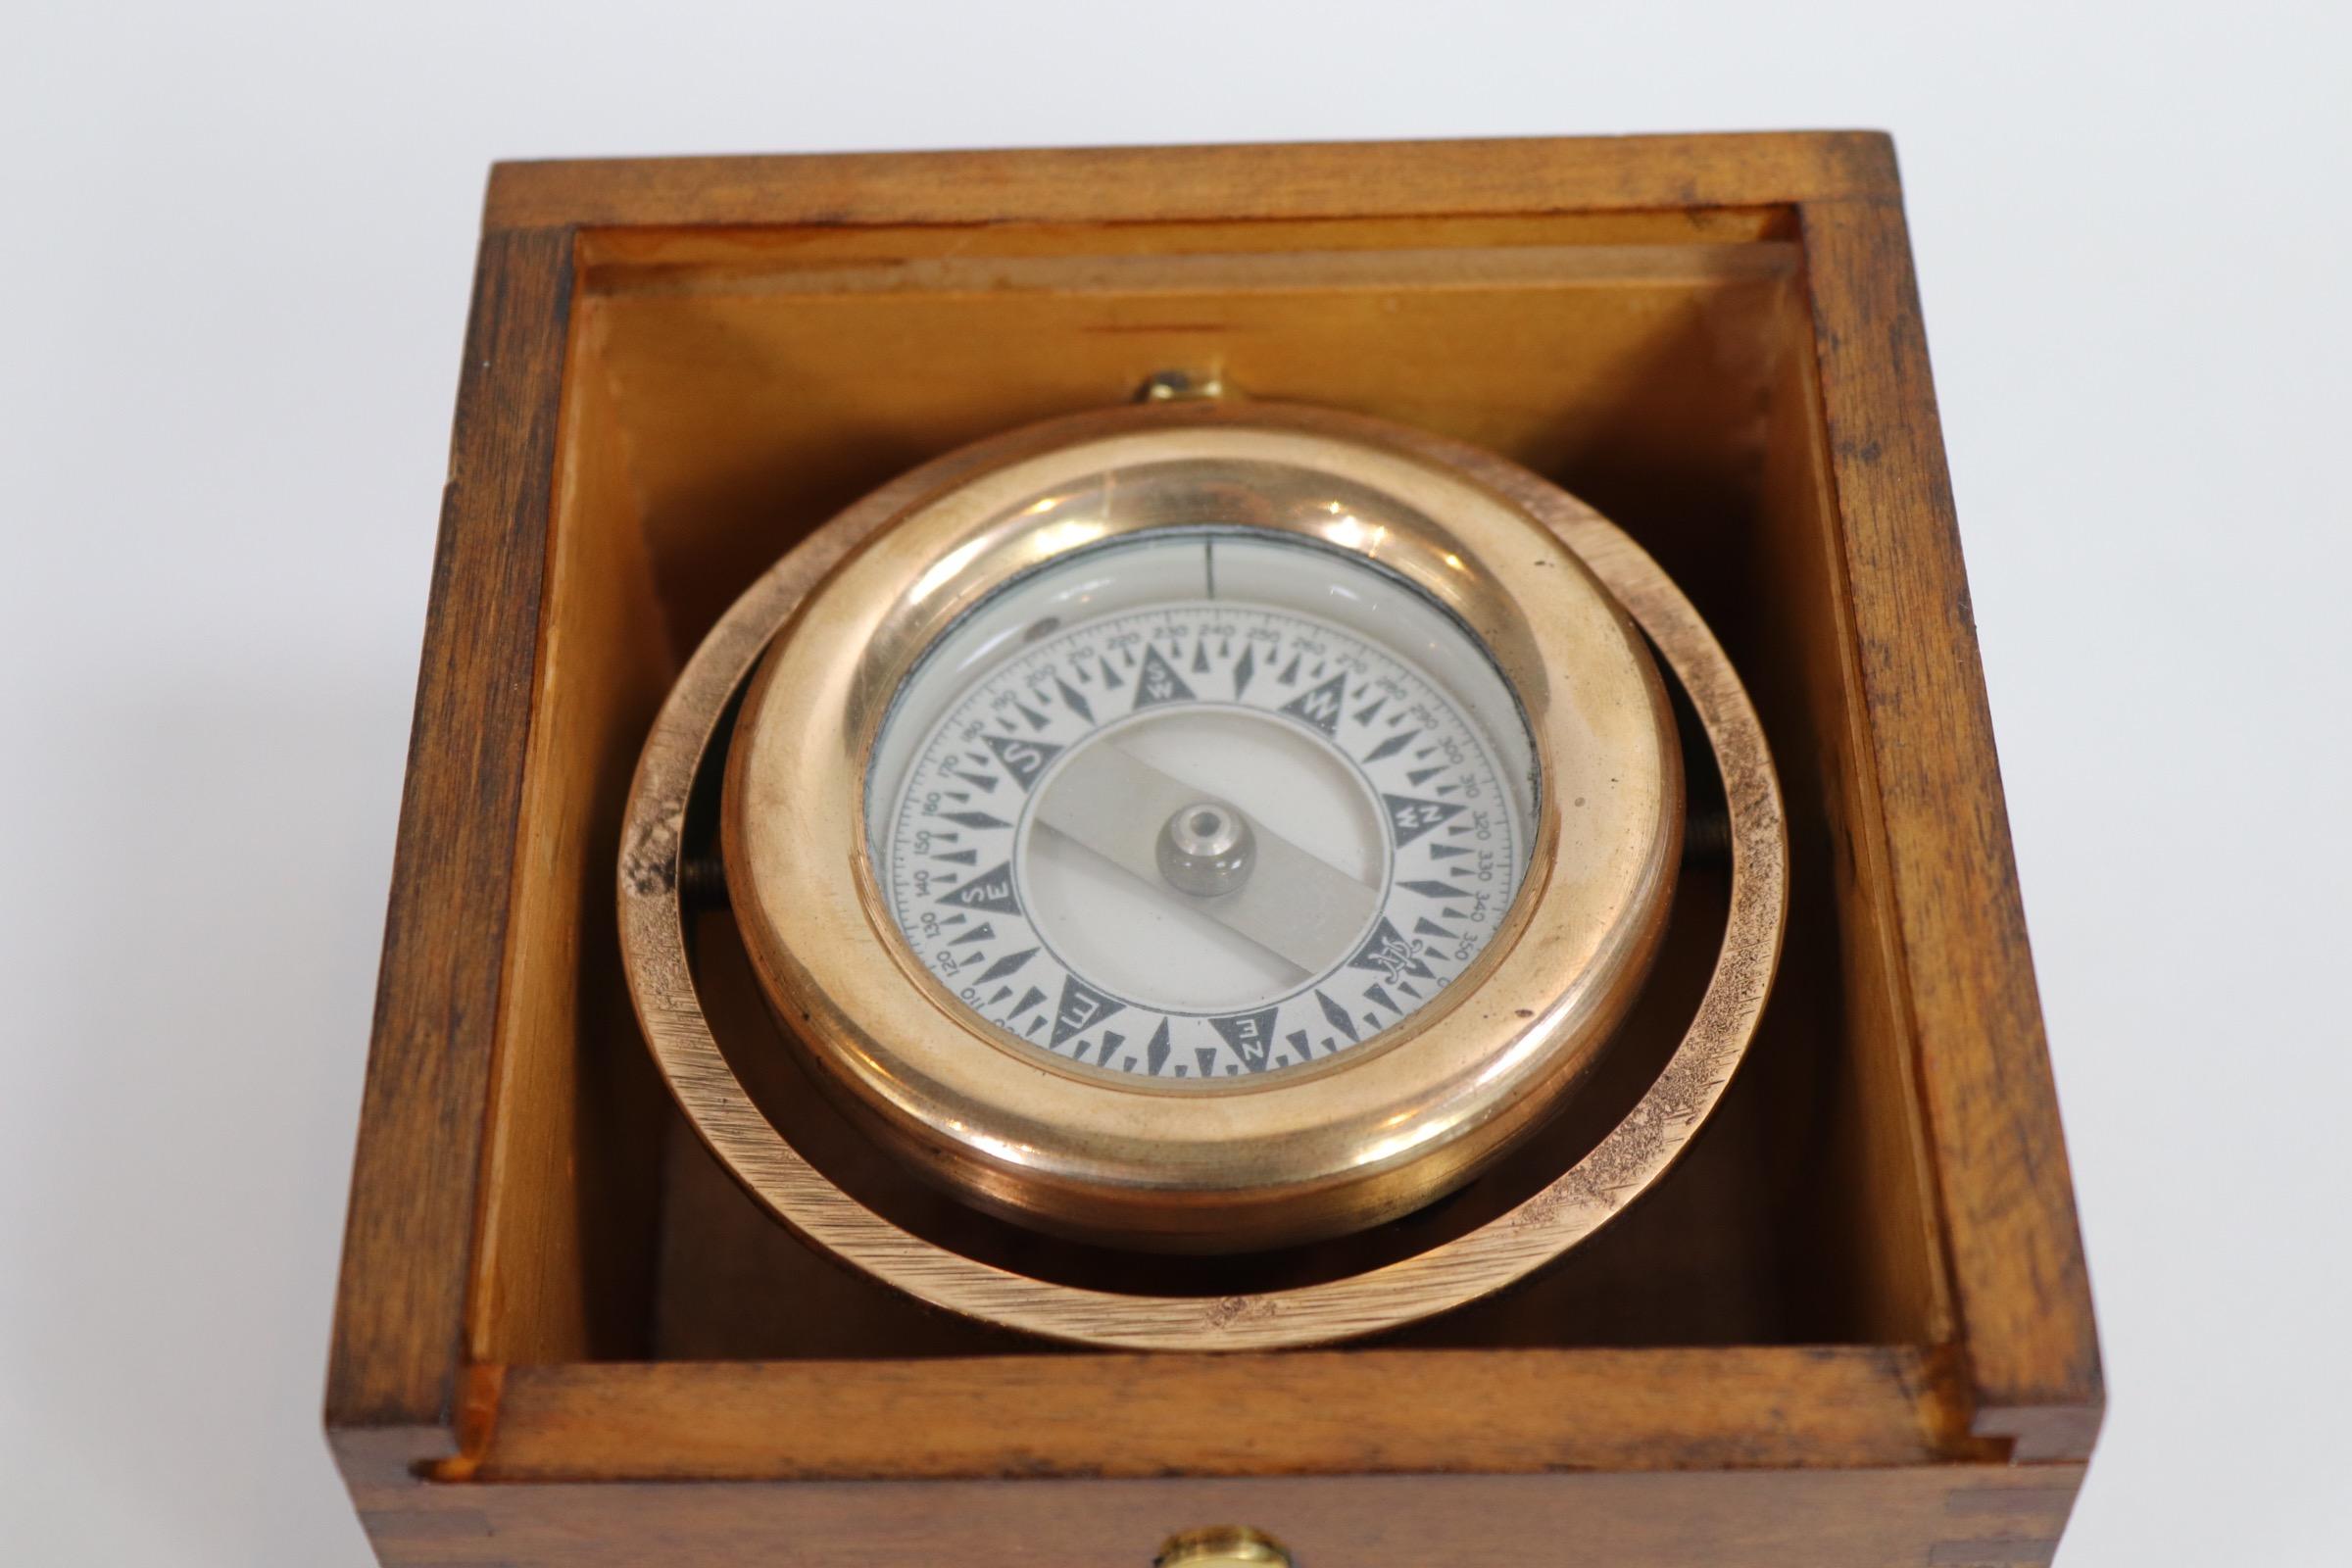 Polished brass boat compass by Connecticut maker Wilcox Crittenden. Fitted to a dovetailed box. Lacking its sliding cover. Weight is 2 pounds.